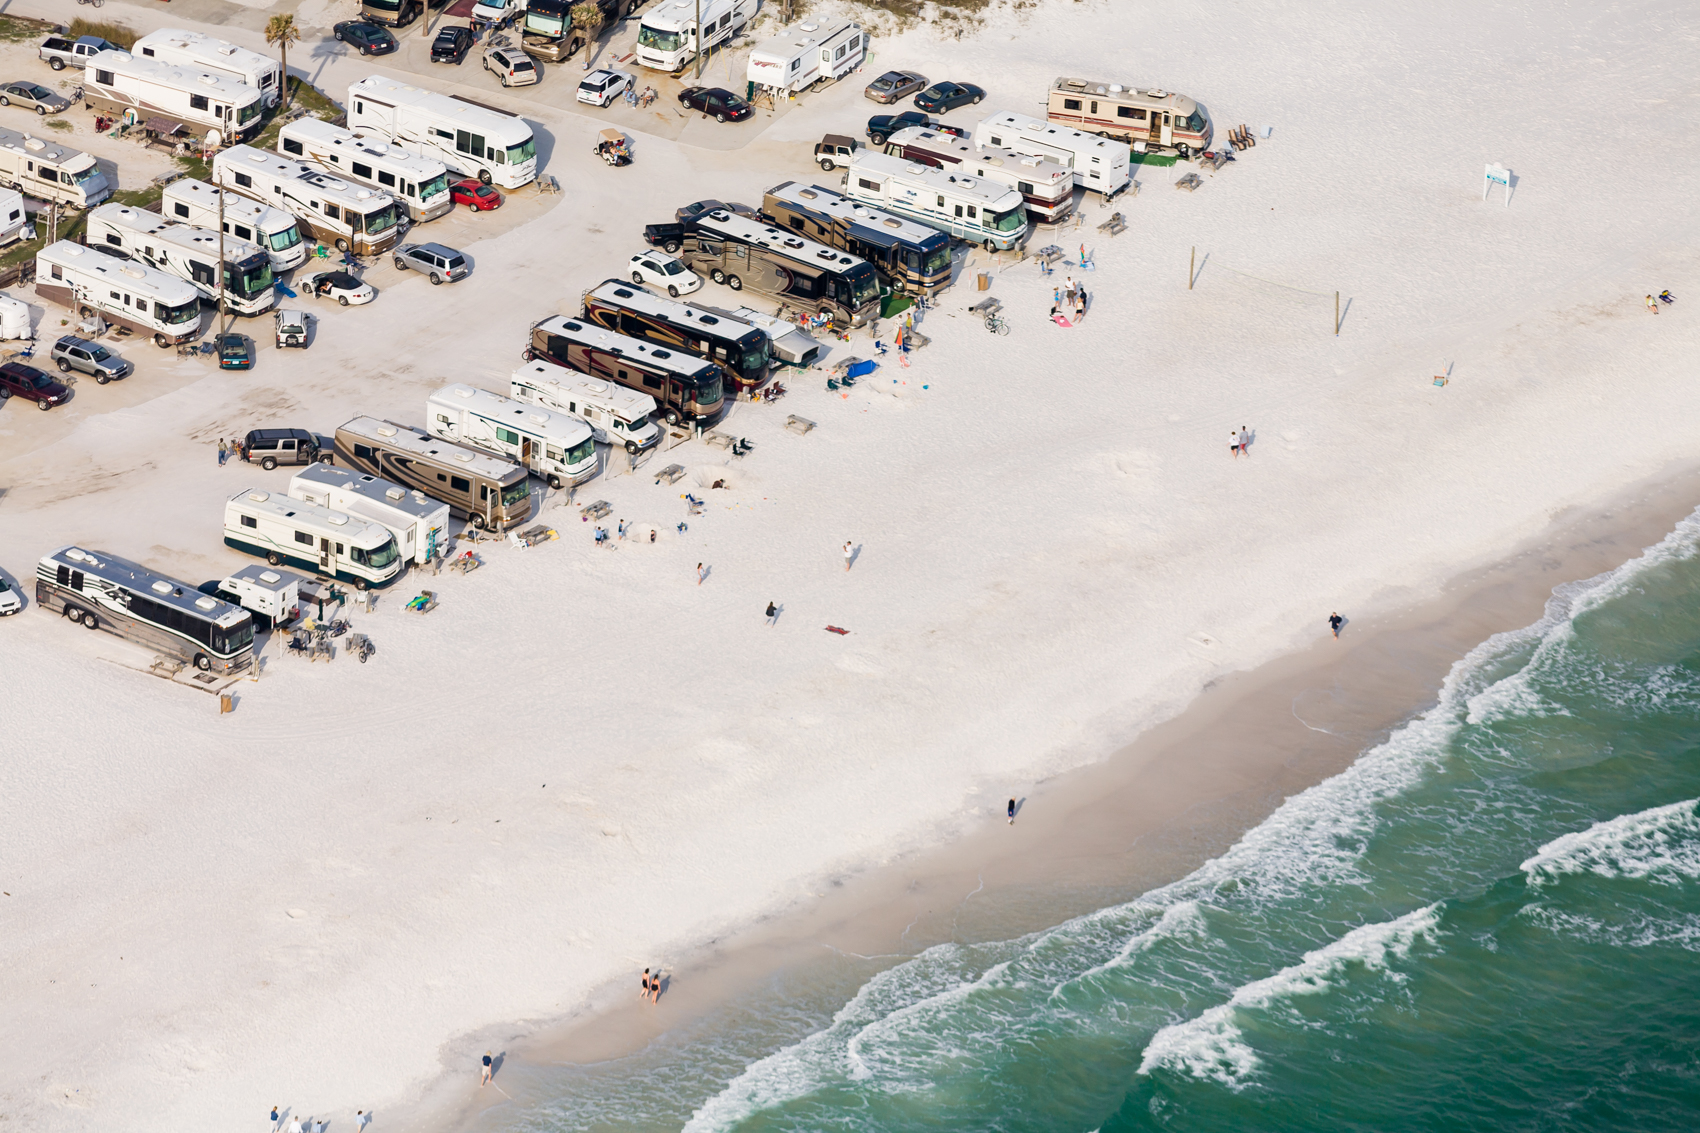 Recreational vehicles, better known as RVs, sit parked along a Florida beach. As of 2007, nearly 8 million U.S. households owned at least one RV.  Typically, the fuel economy of RVs is less than 10 miles per gallon.